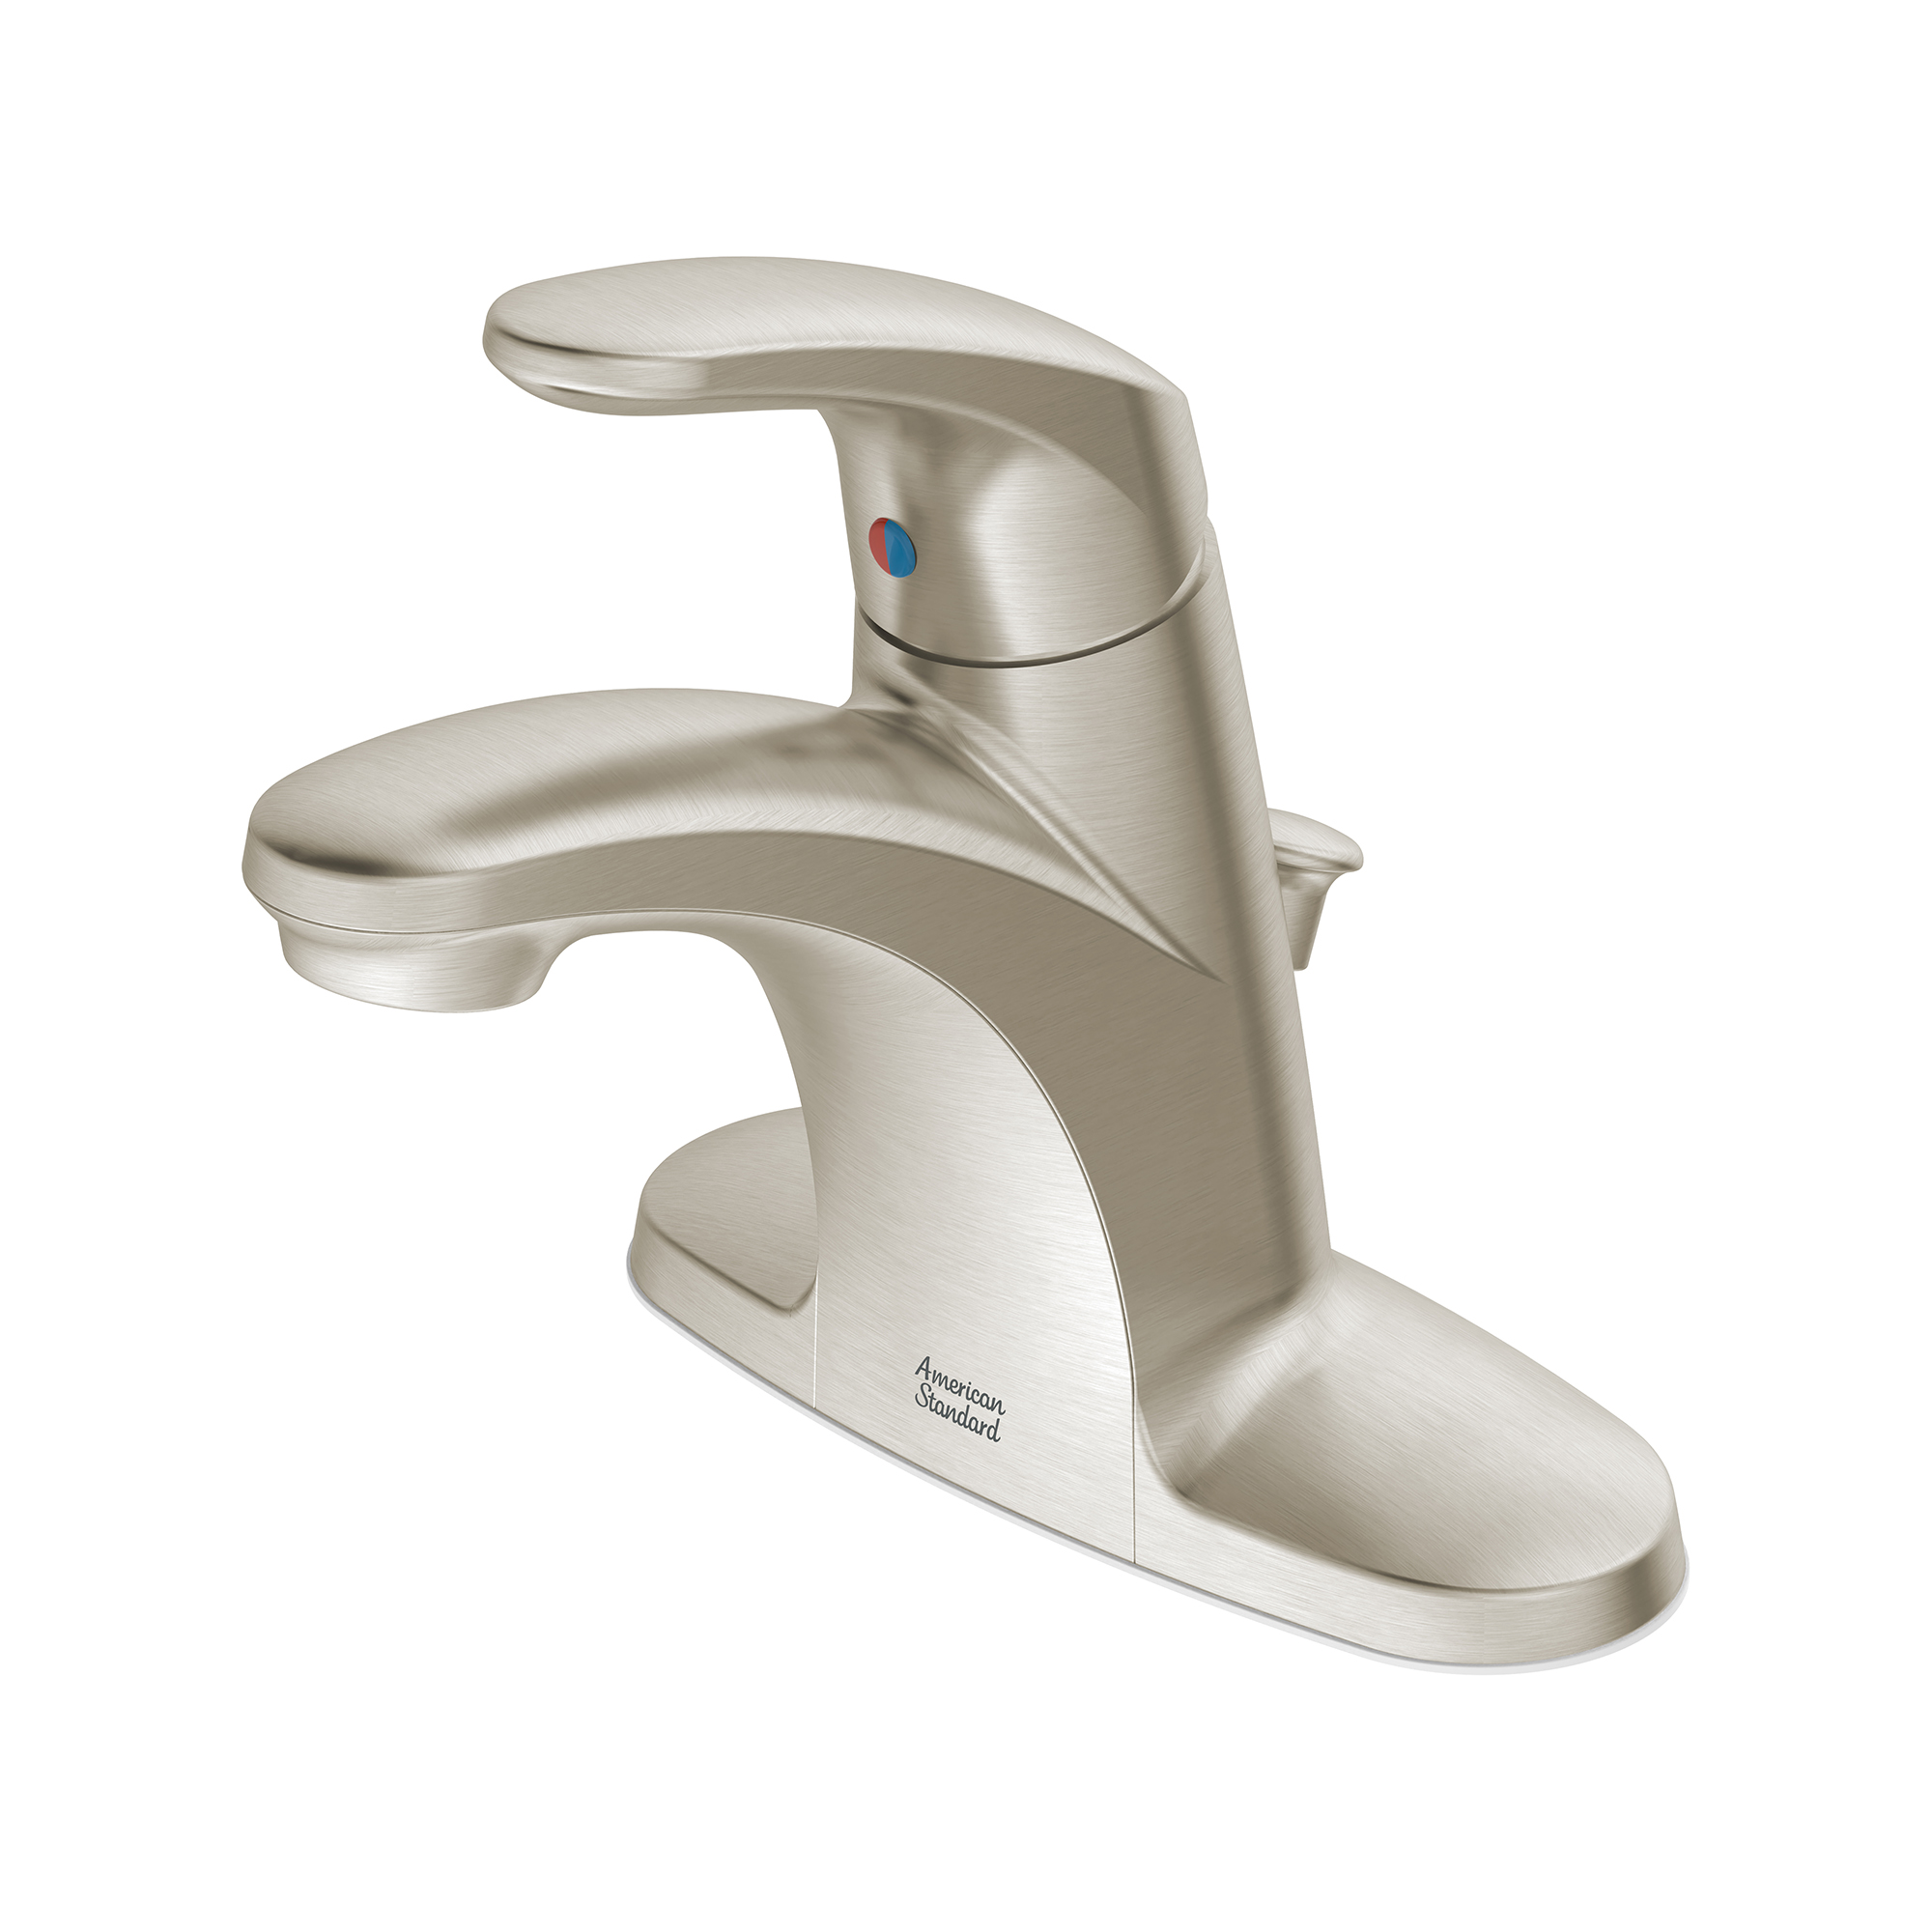 Colony™ PRO 4-Inch Centerset Single-Handle Bathroom Faucet 1.2 gpm/4.5 L/min With Lever Handle